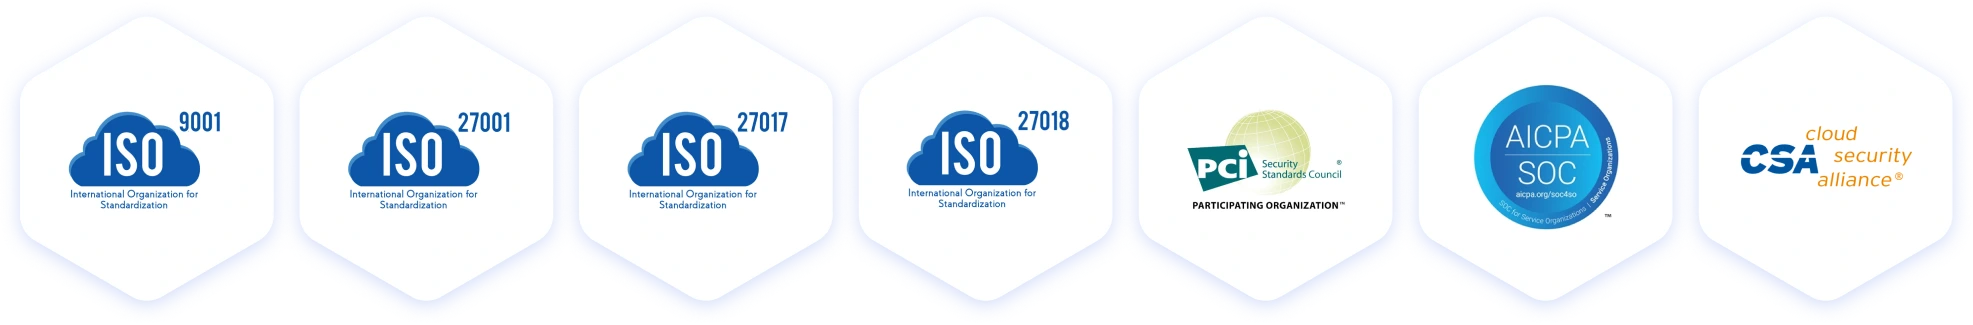 ISO27001 and Datacenter Certifications